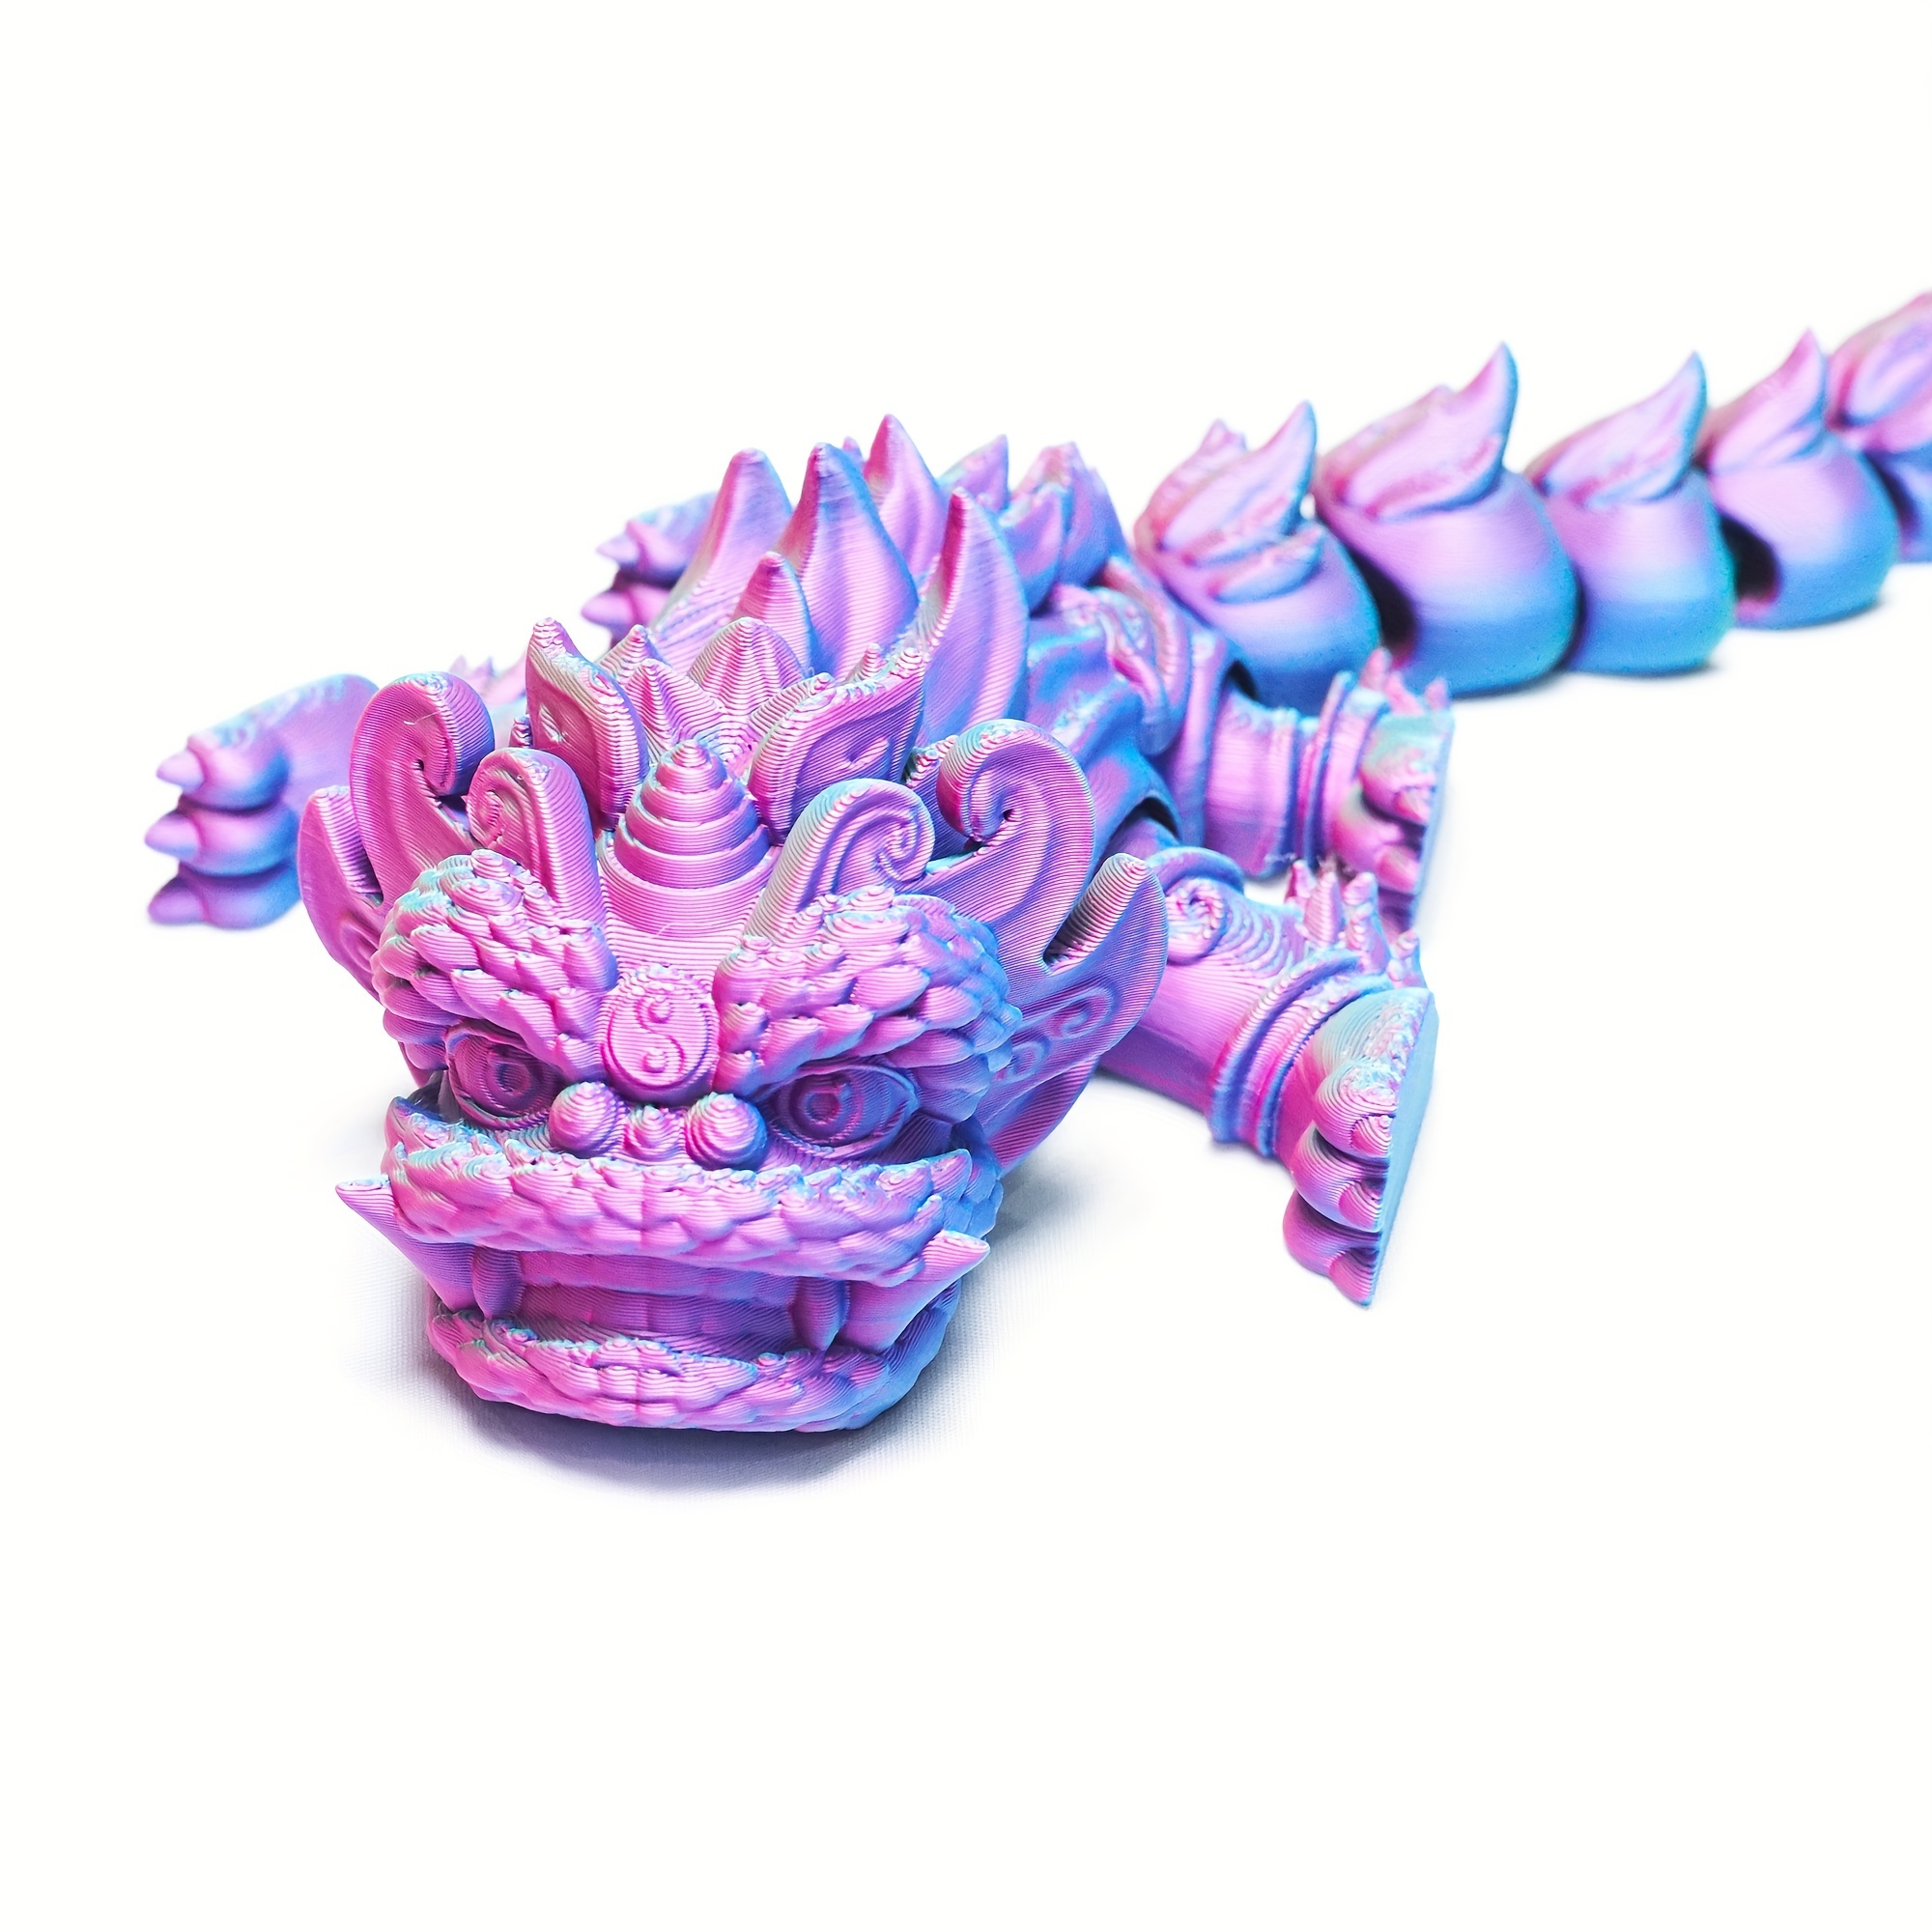 1pc 3d printed articulated chinese guardian lion figurine multi joint movable mythical creature ornament creative poseable collectible toy plastic desk ornament home decor room decor